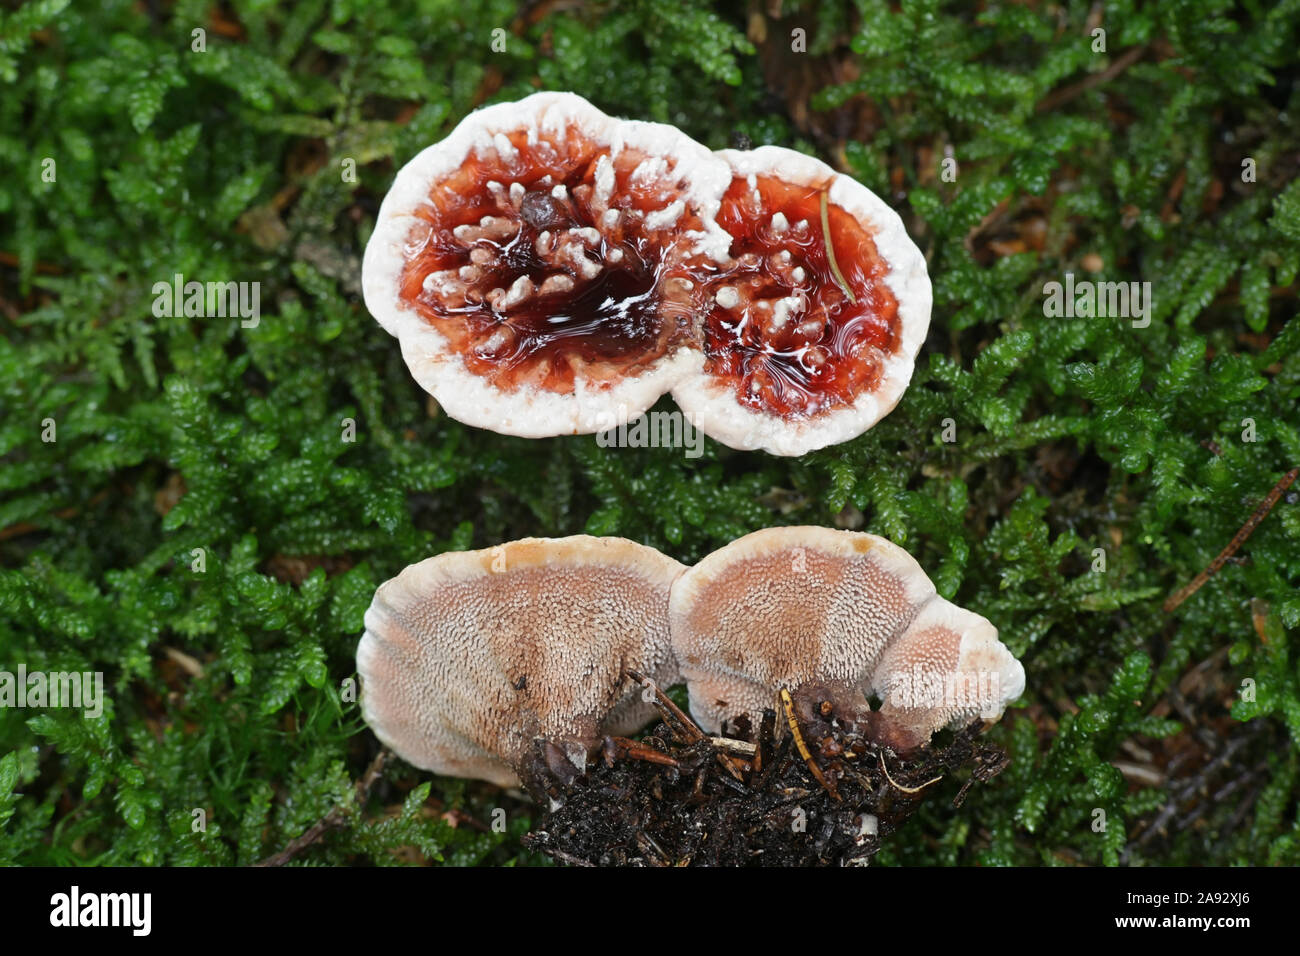 Hydnellum peckii, known as strawberries and cream, the bleeding Hydnellum and the bleeding tooth fungus,  wild mushroom from Finland Stock Photo